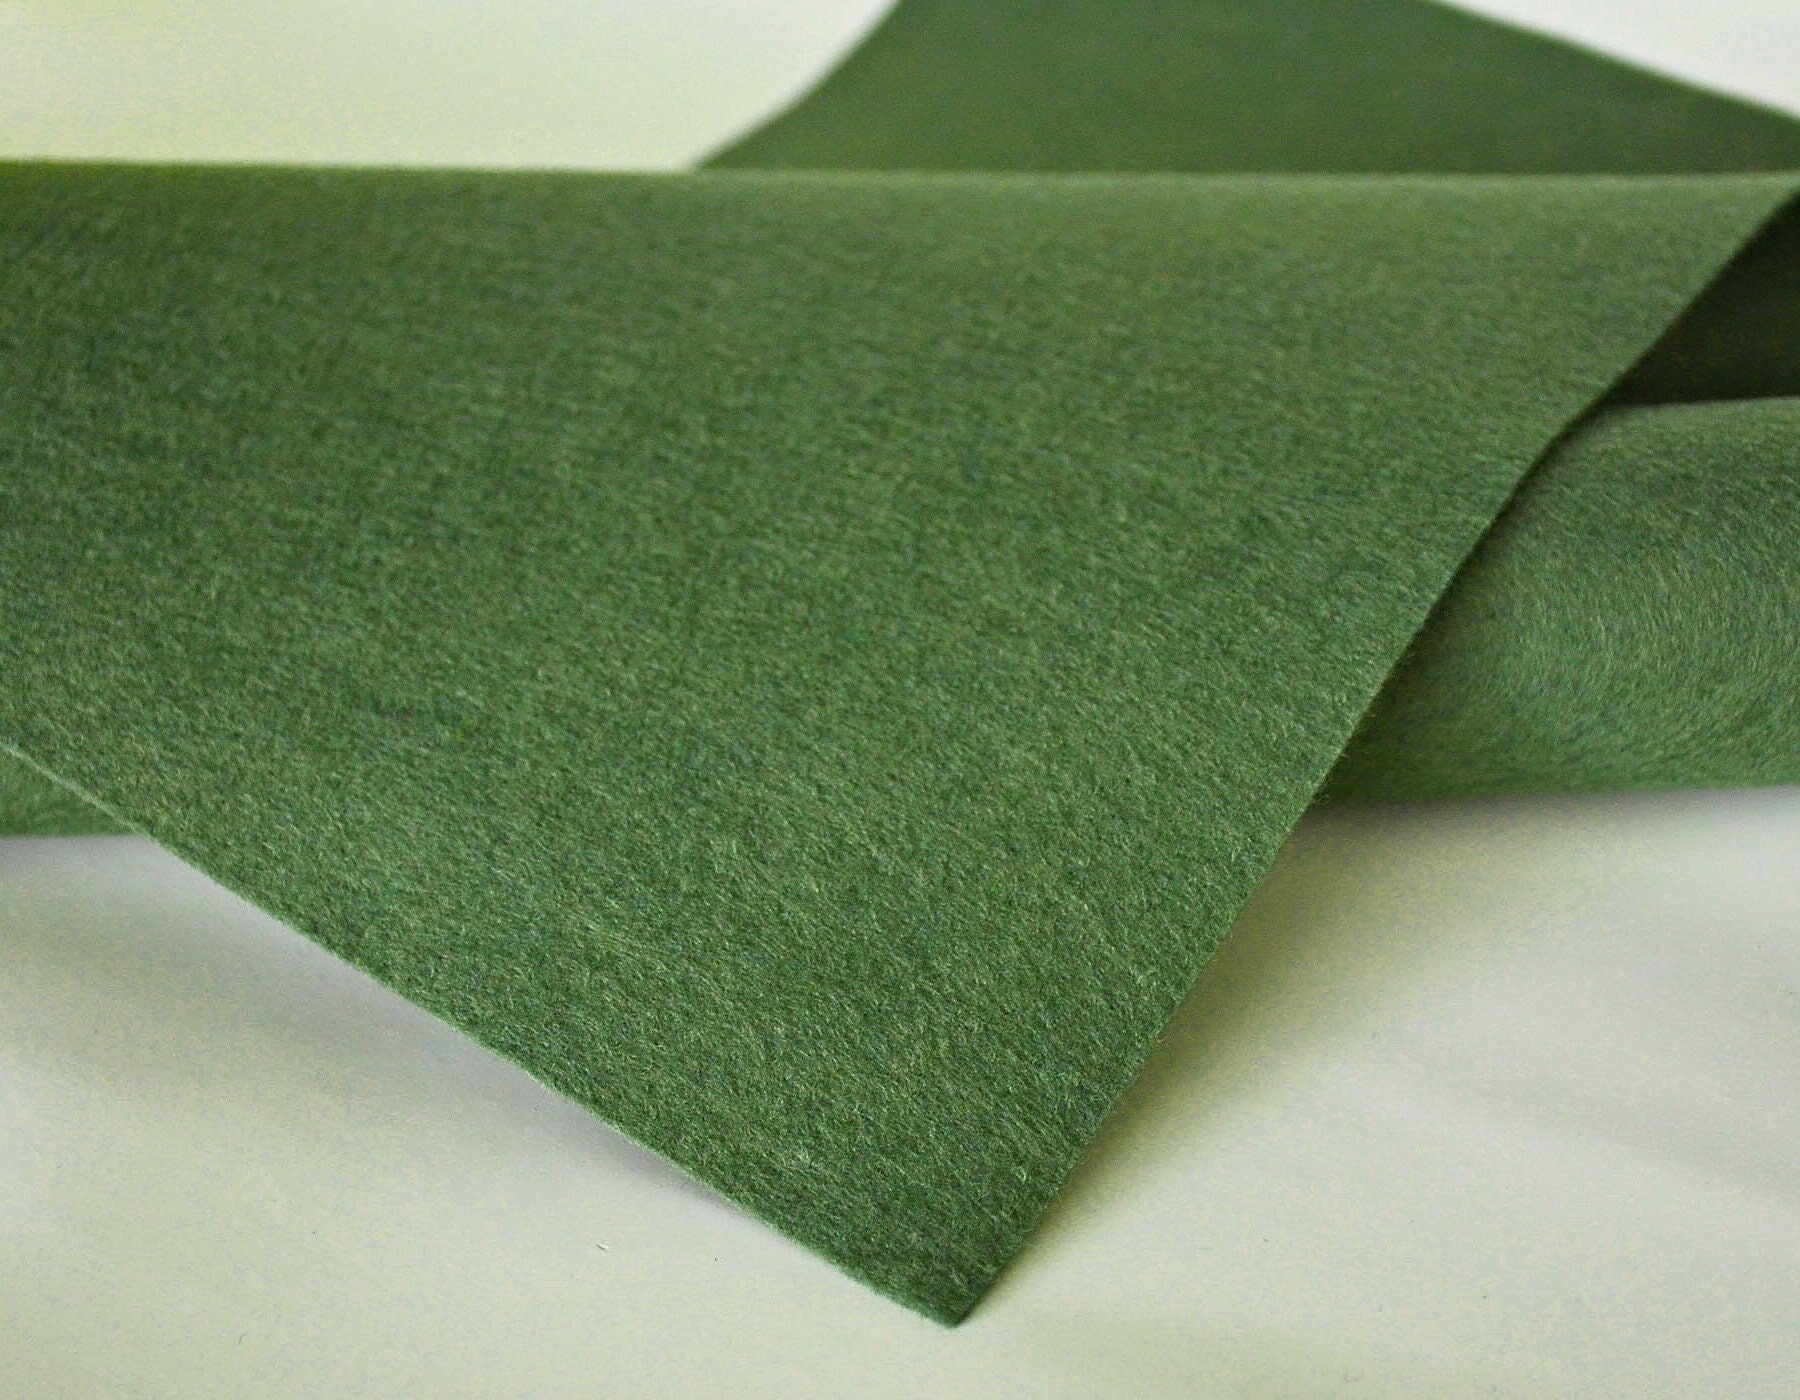  21 Felt Sheets - 6X6 inch Spring Colors Collection - Made in  USA - Merino Wool Blend Felt